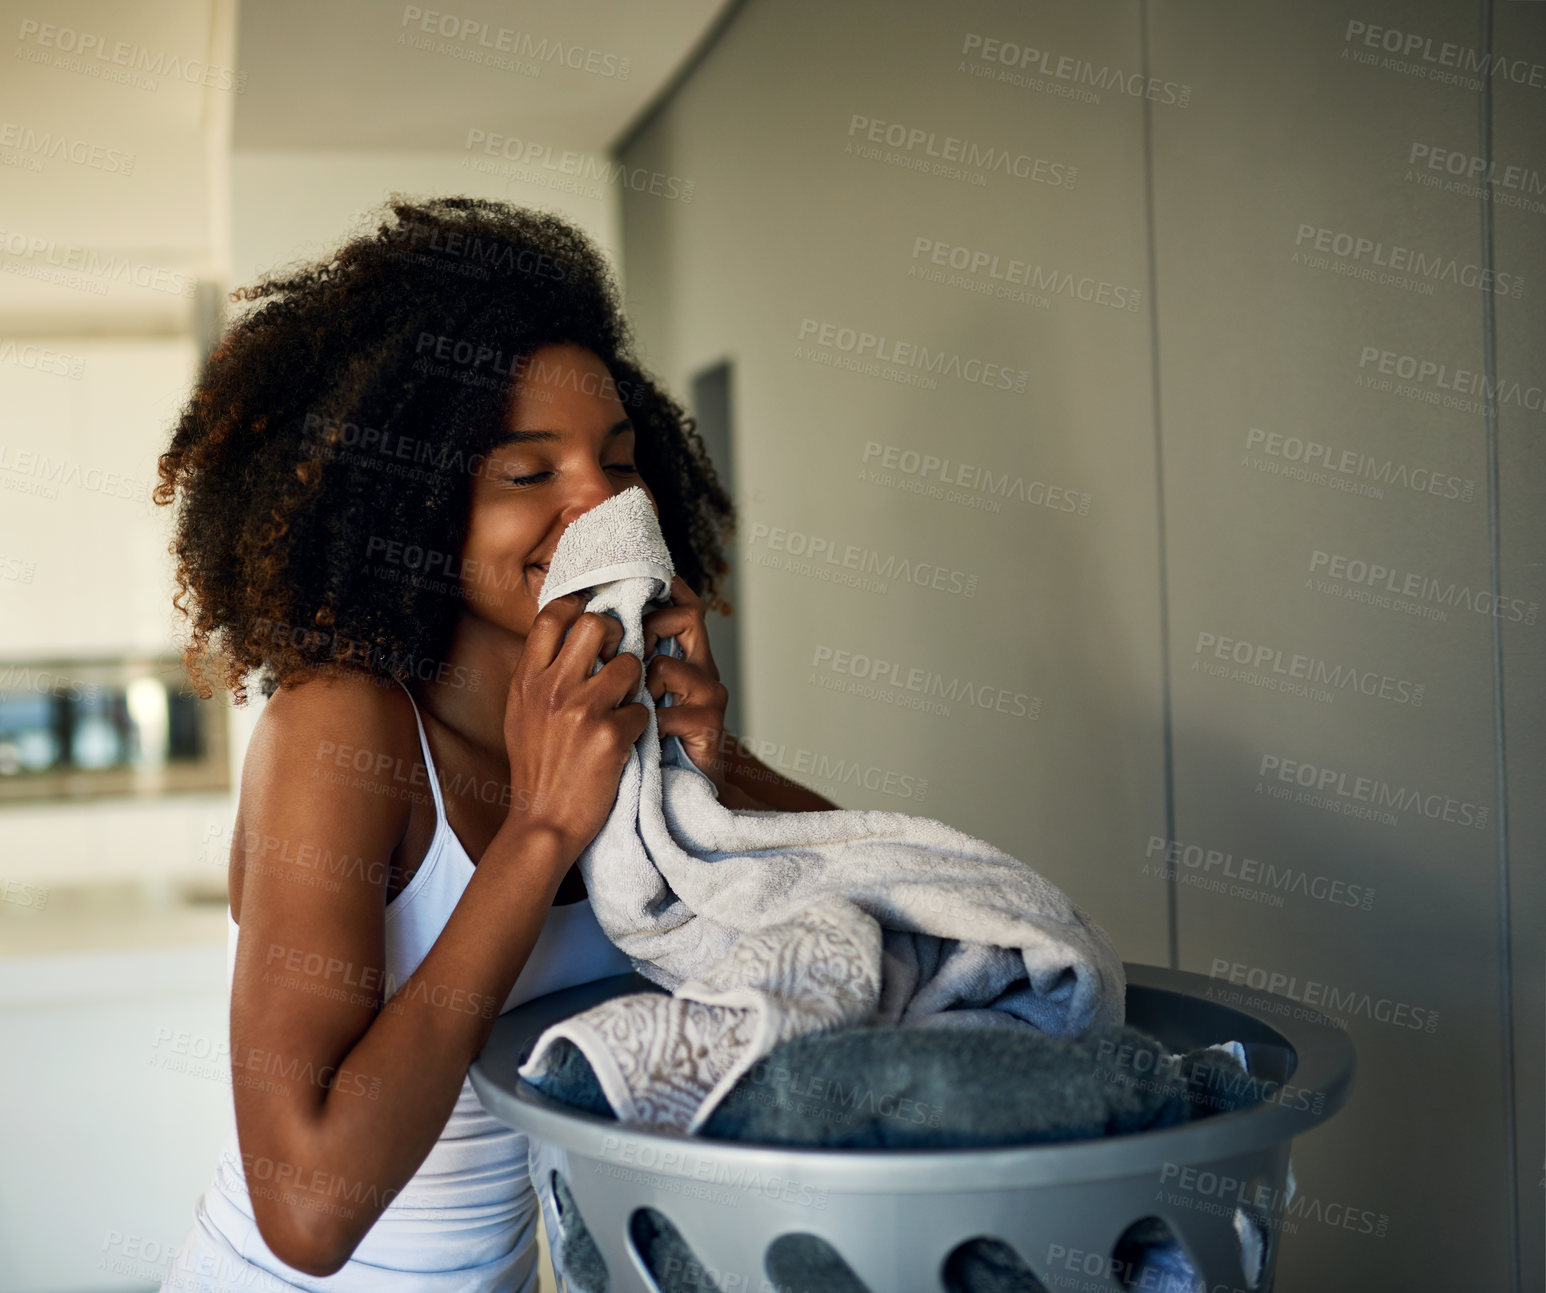 Buy stock photo Cropped shot of an attractive young woman smelling clean laundry at home